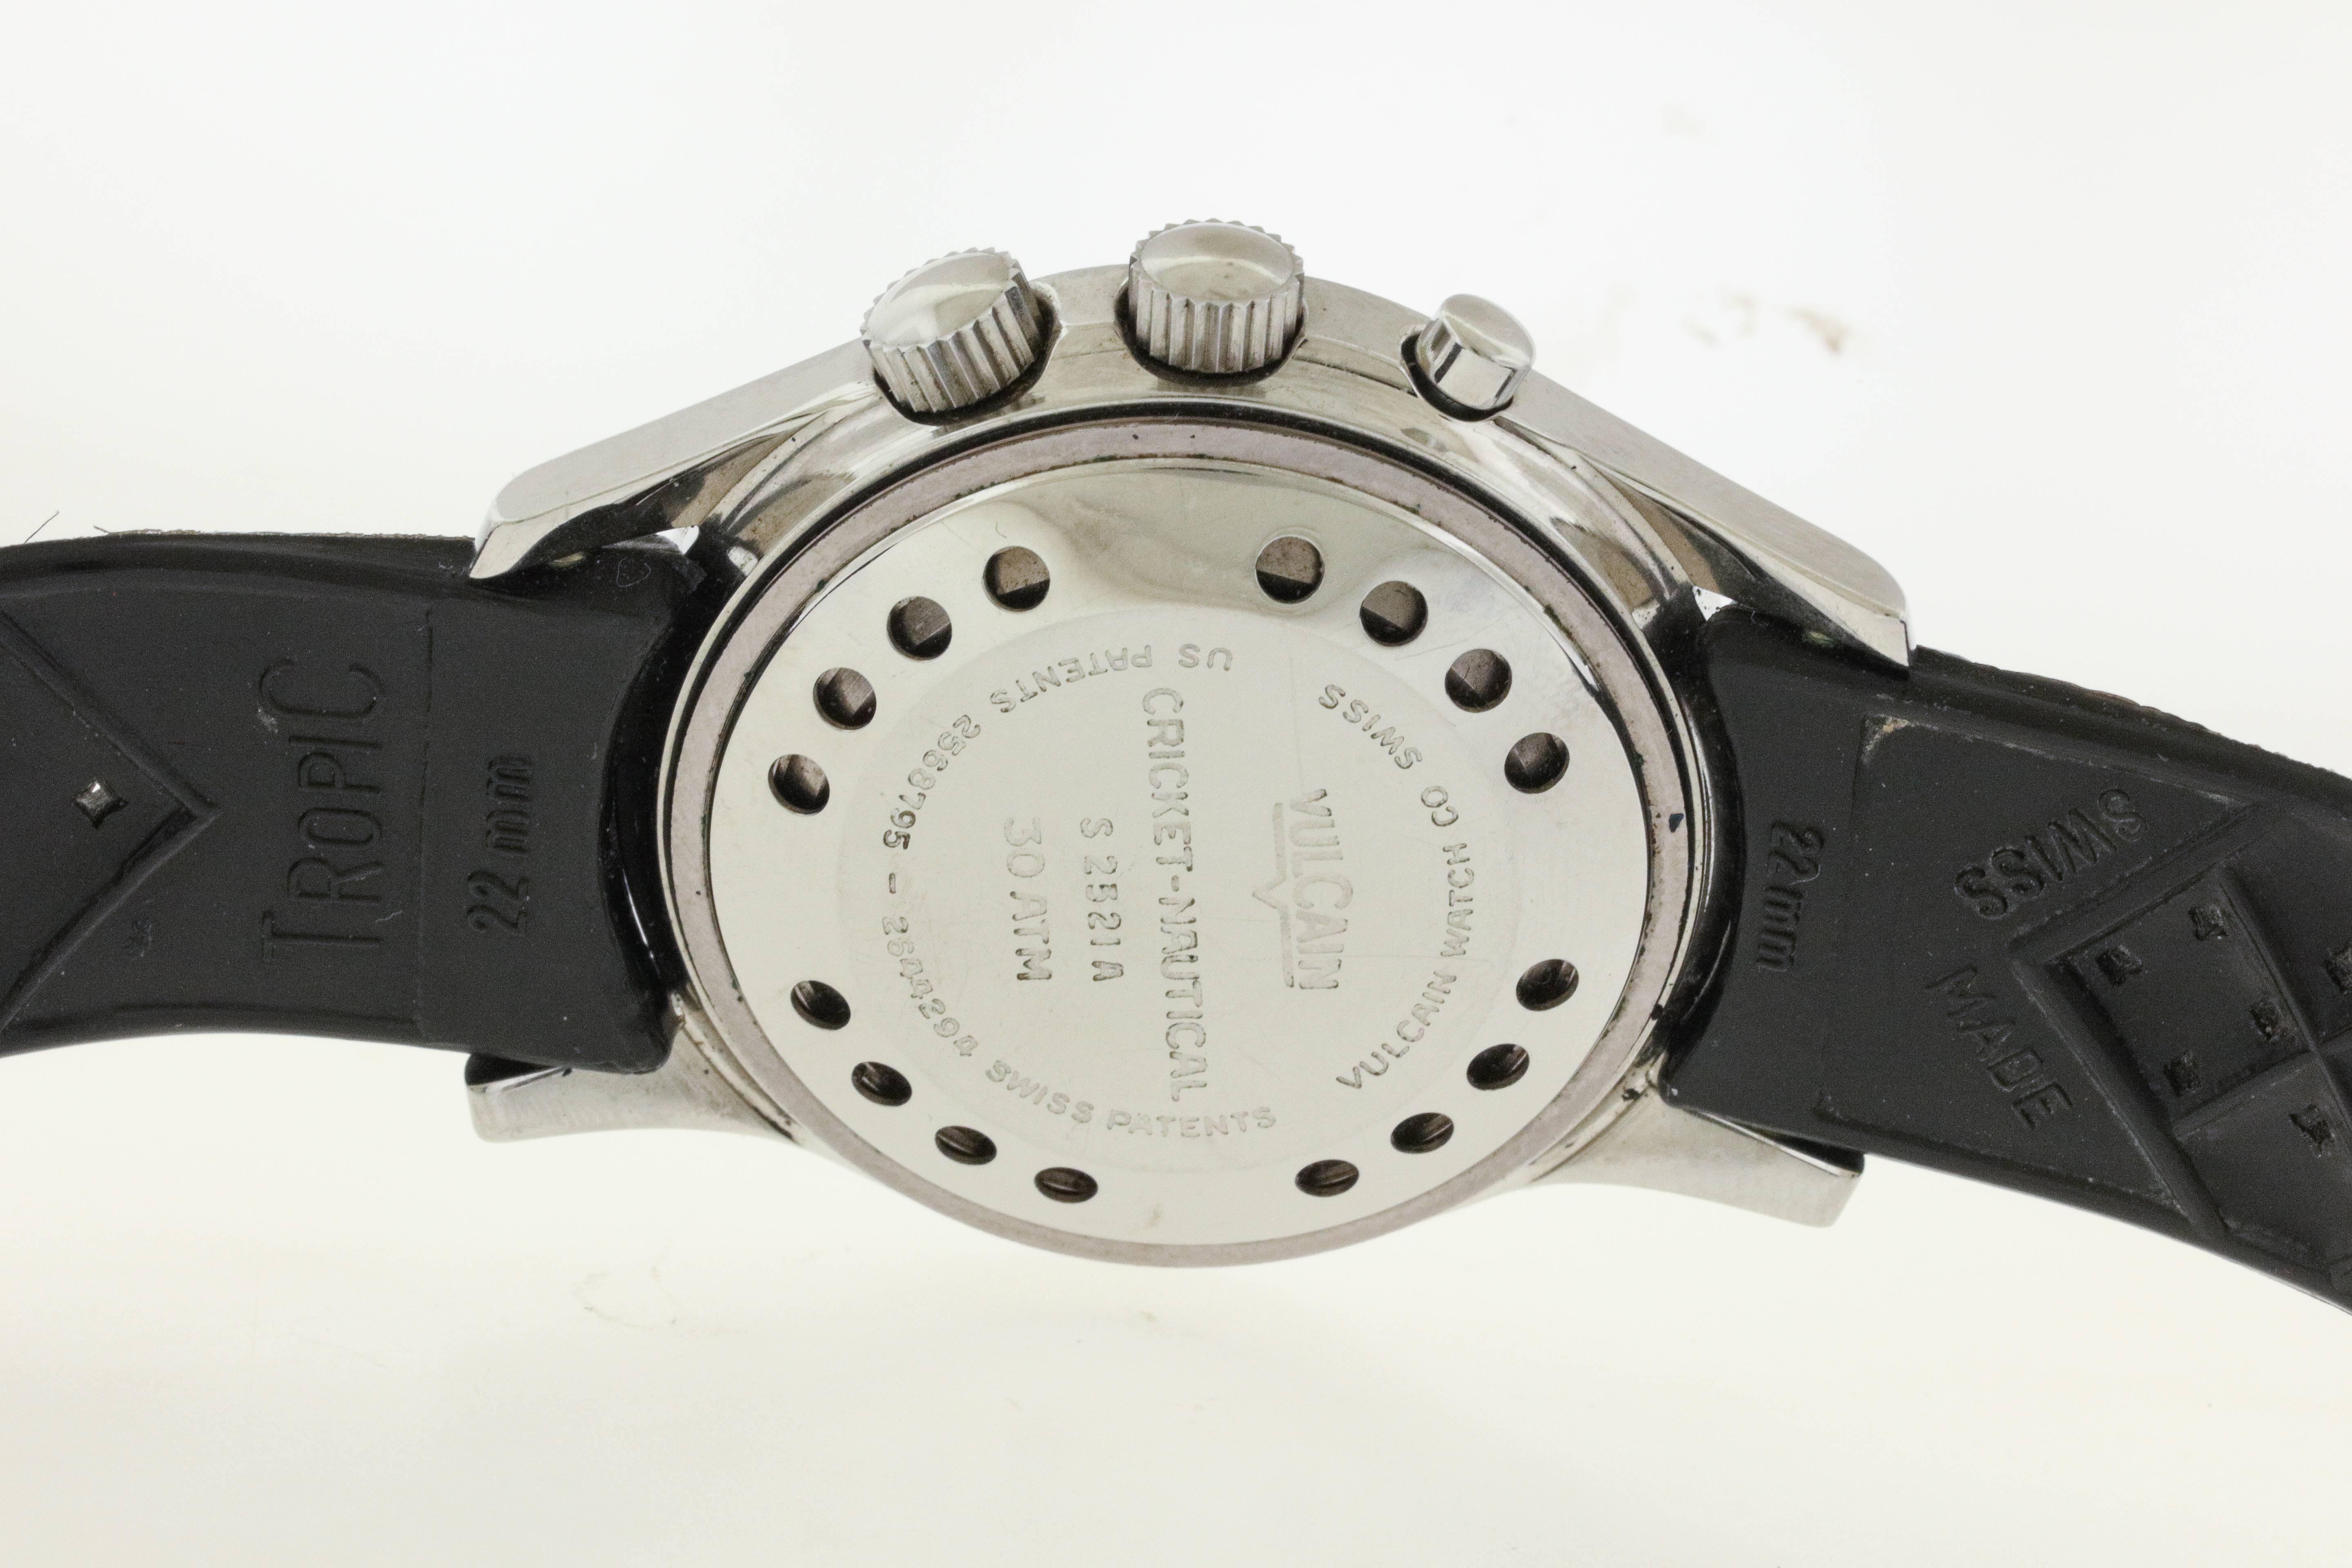 Stainless steel Vulcain Cricket- Nautical diver's watch with alarm, circa 1961, No S 2321A, is a 42mm new-old stock wristwatch in extraordinary condition. The double-cased screw-down and snap-back waterproof design is engraved 